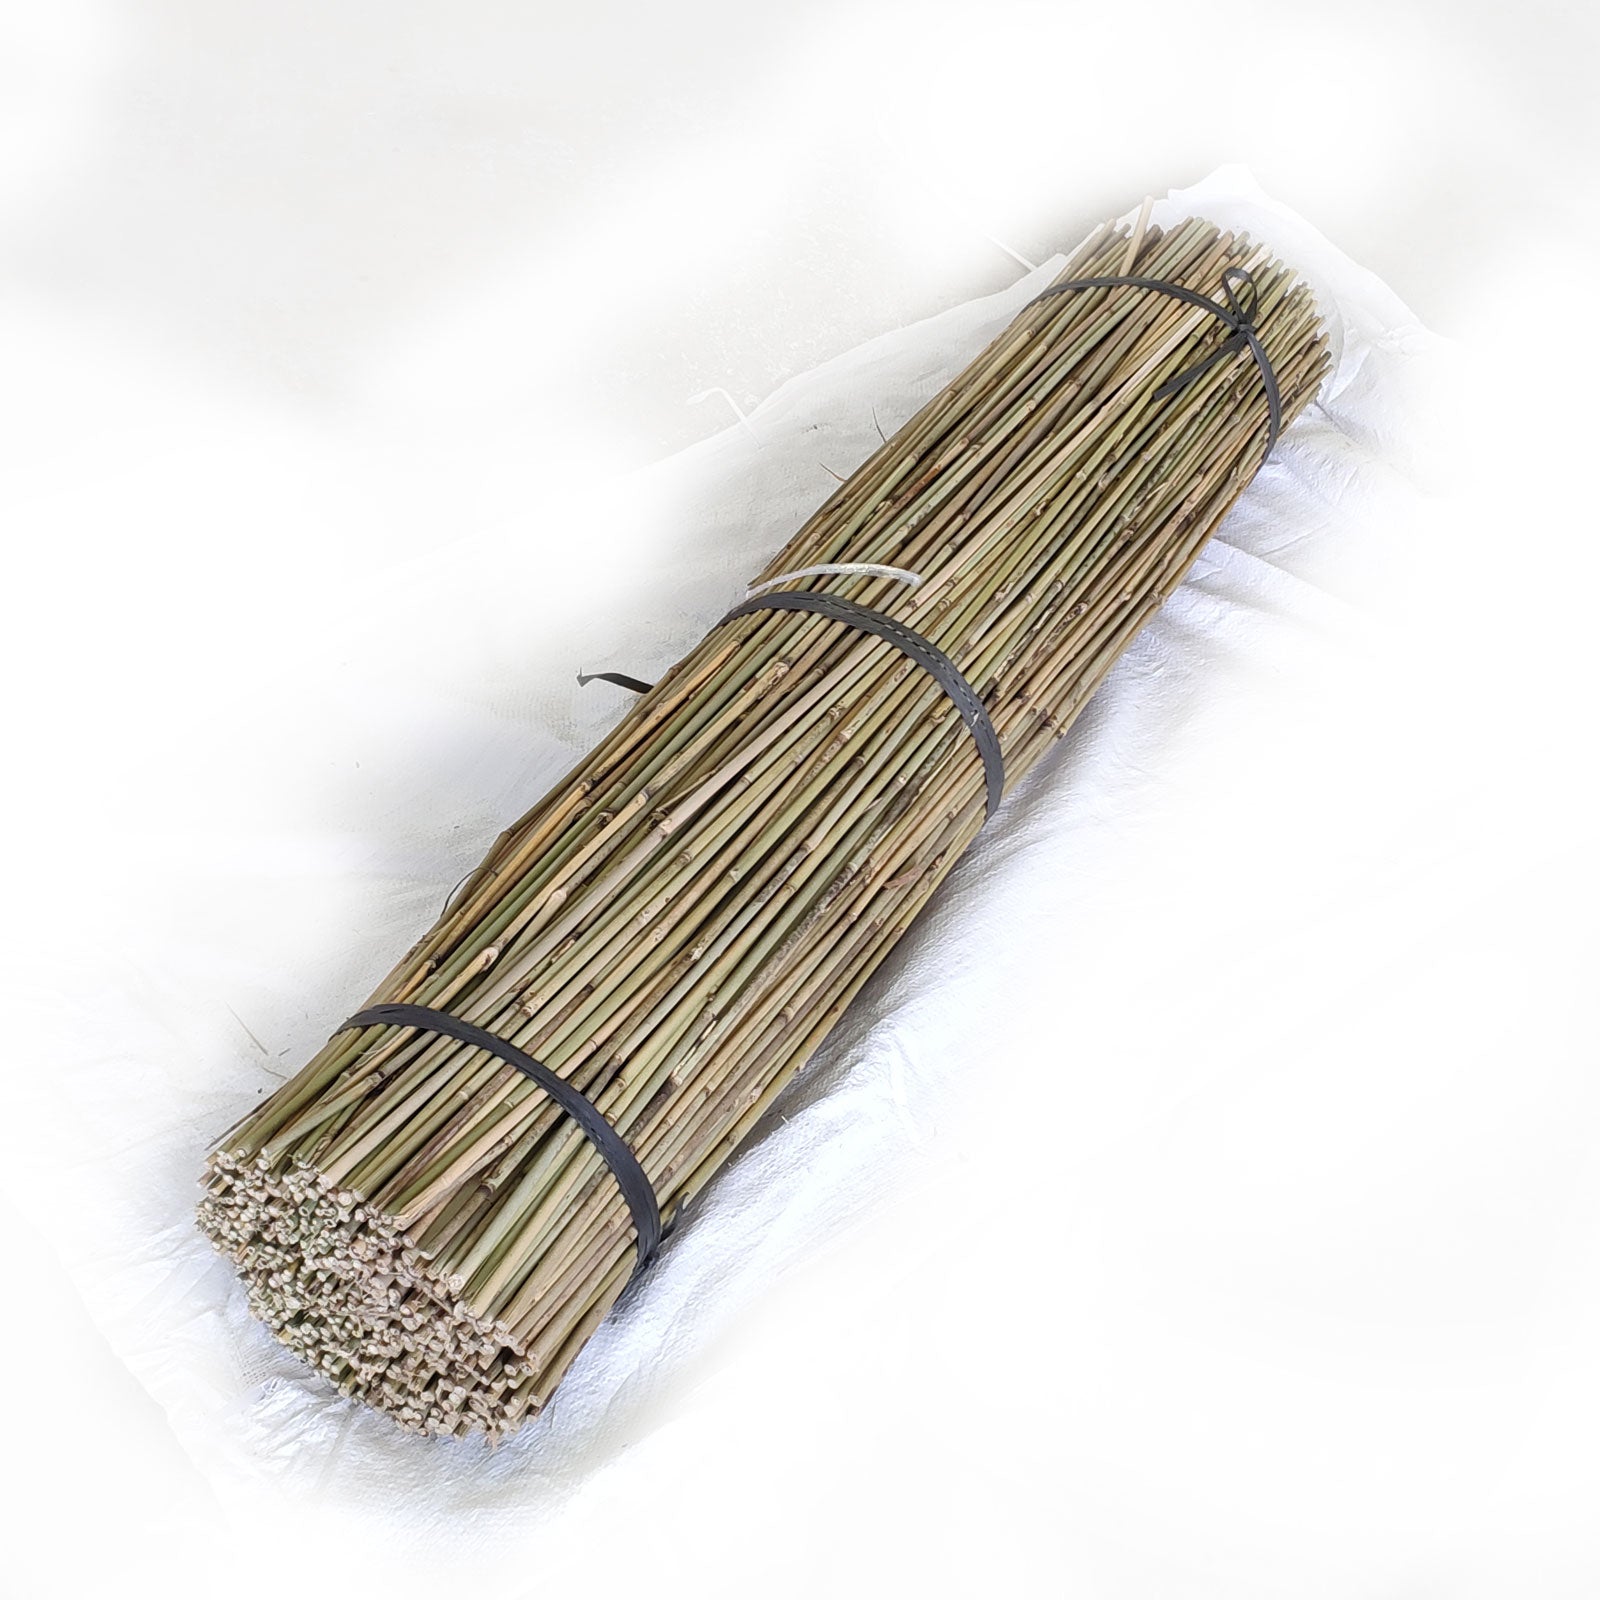 Tonkin Bamboo Stakes 4'L x 6-8 mm - Bundle of 500 - Bamboo Toronto Store